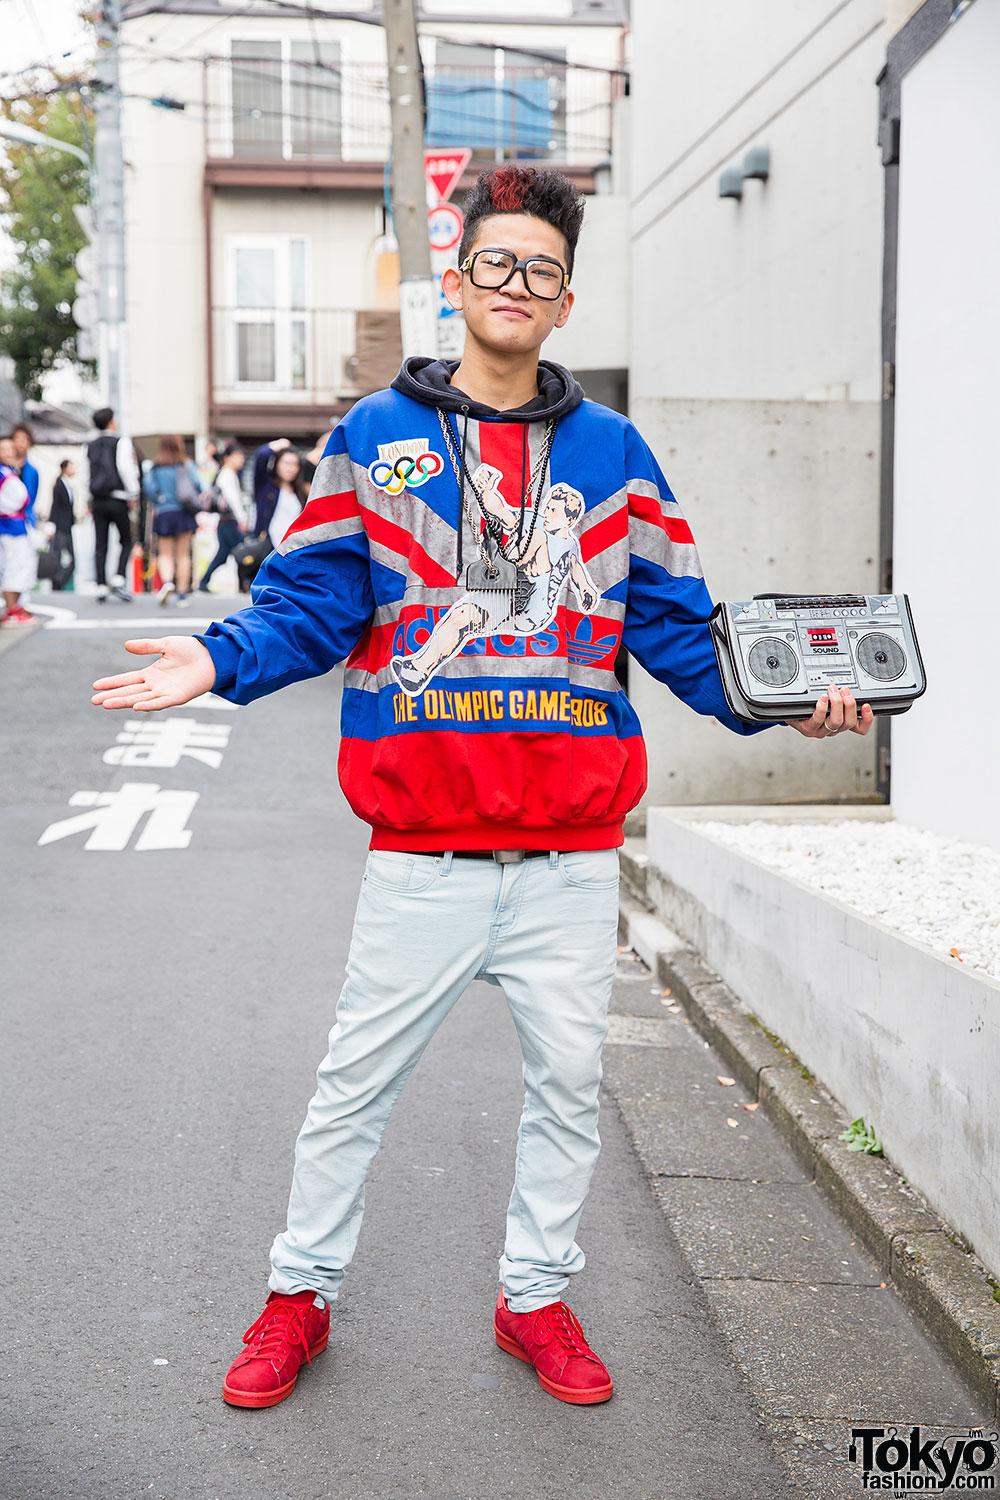 Tokyo Fashion on Twitter: "Harajuku pastry chef w/ hi-top fade, Adidas Olympics sweatshirt, boombox bag &amp; sneakers http://t.co/h0UHq0S4O4 http://t.co/6atZ1h7rip" /